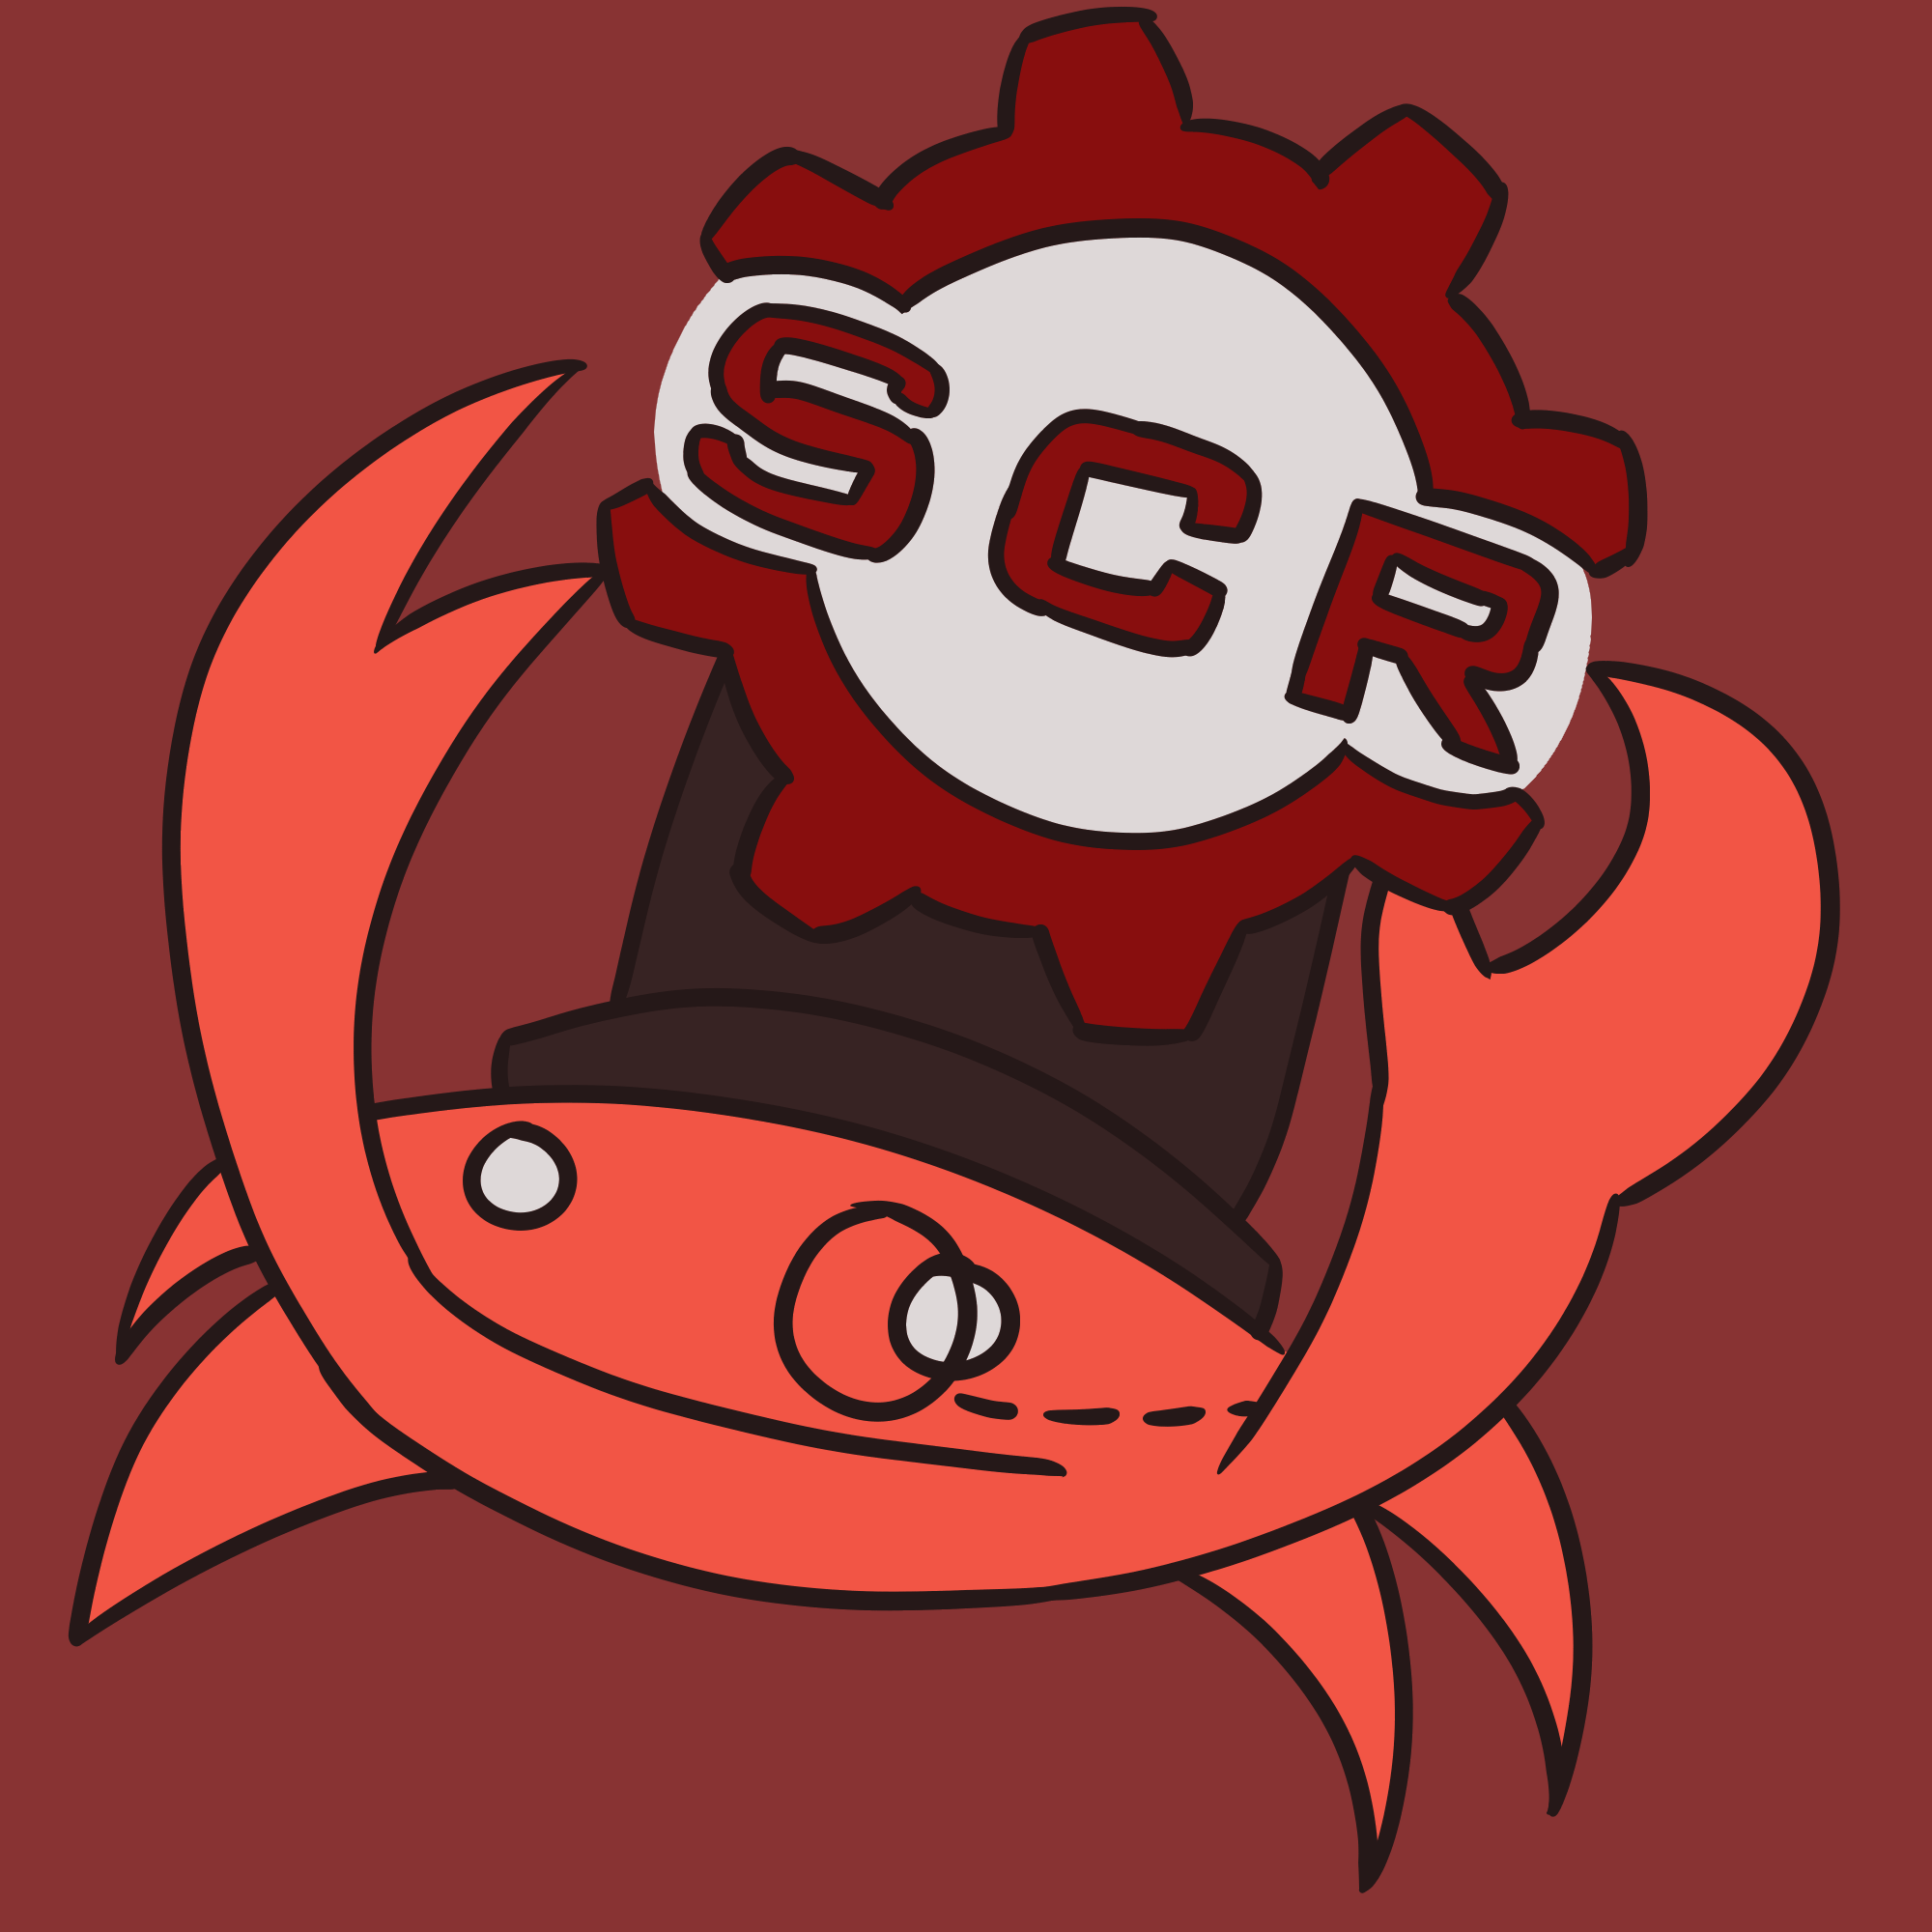 Scrabby with a red background holding the SCR logo